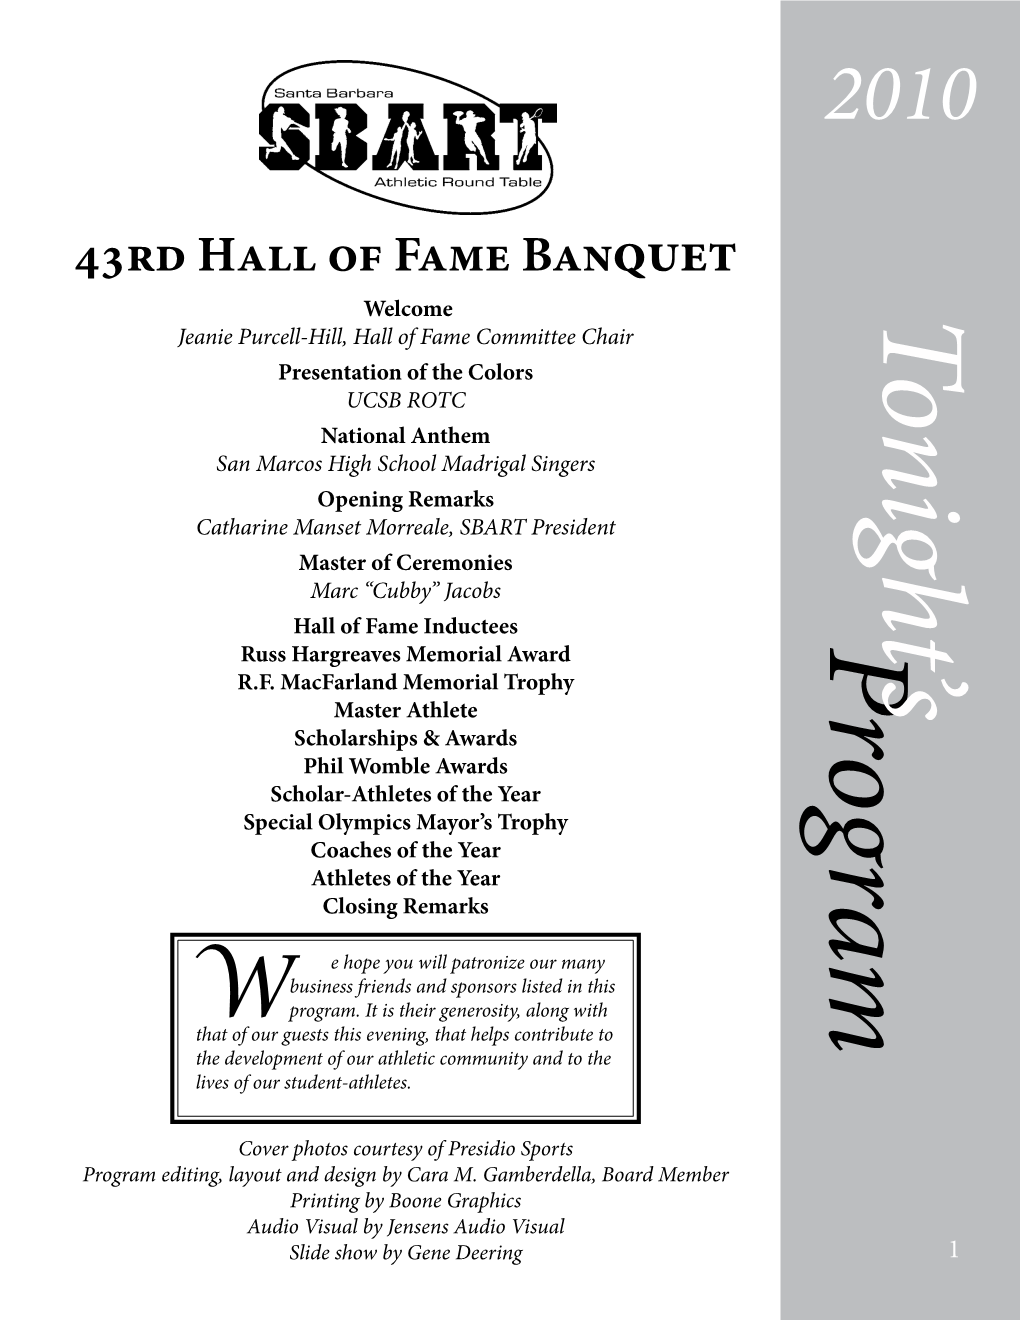 43Rd Hall of Fame Banquet